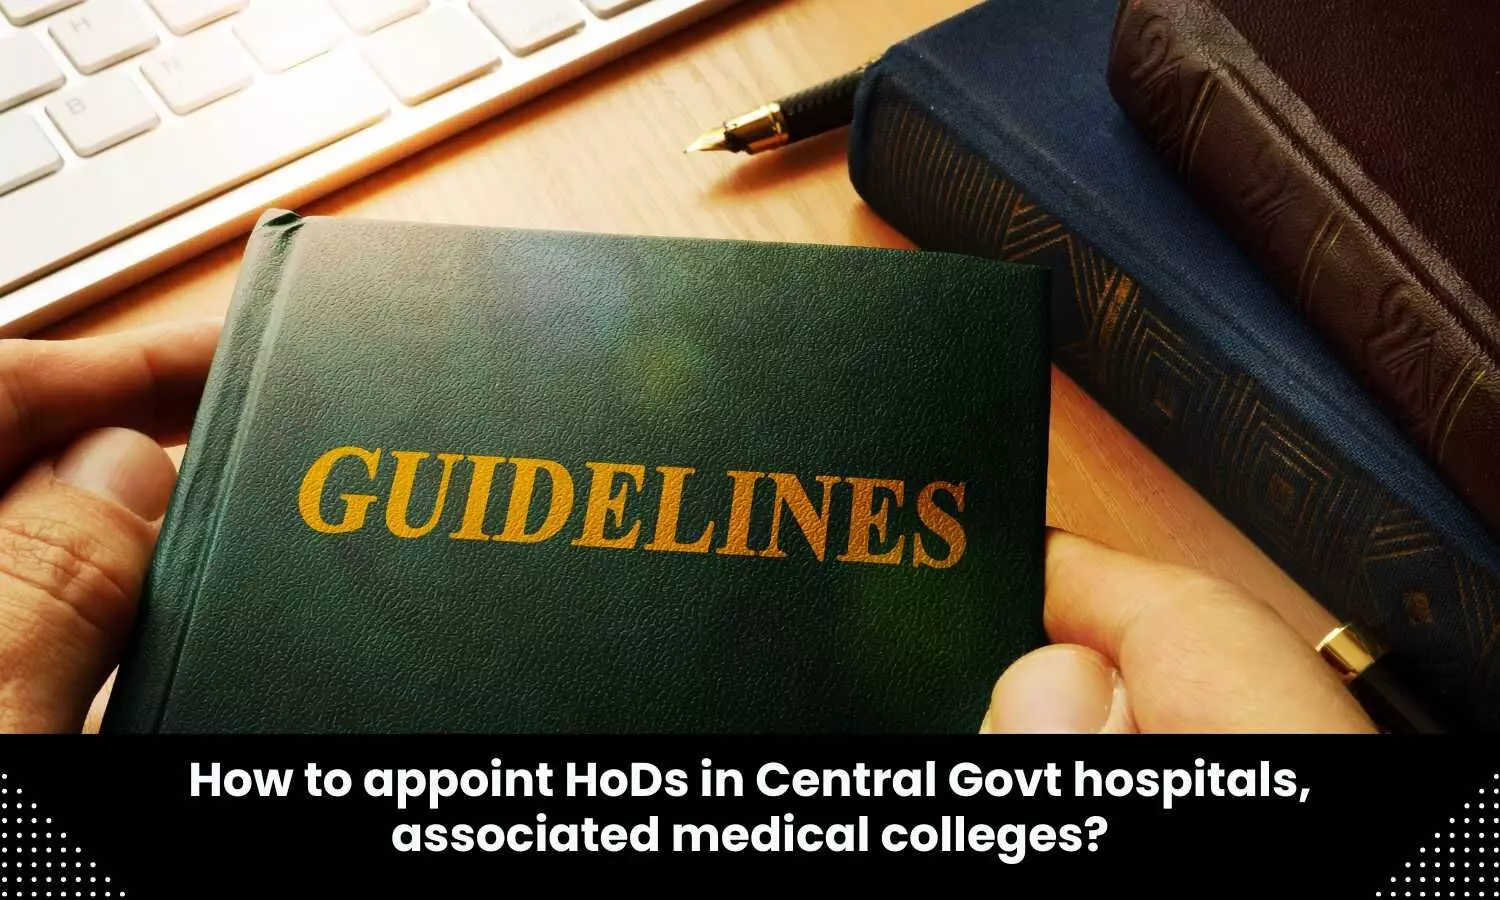 Health Ministry notifies guidelines for appointing HoDs in 3 Central Government Hospitals, associated medical colleges